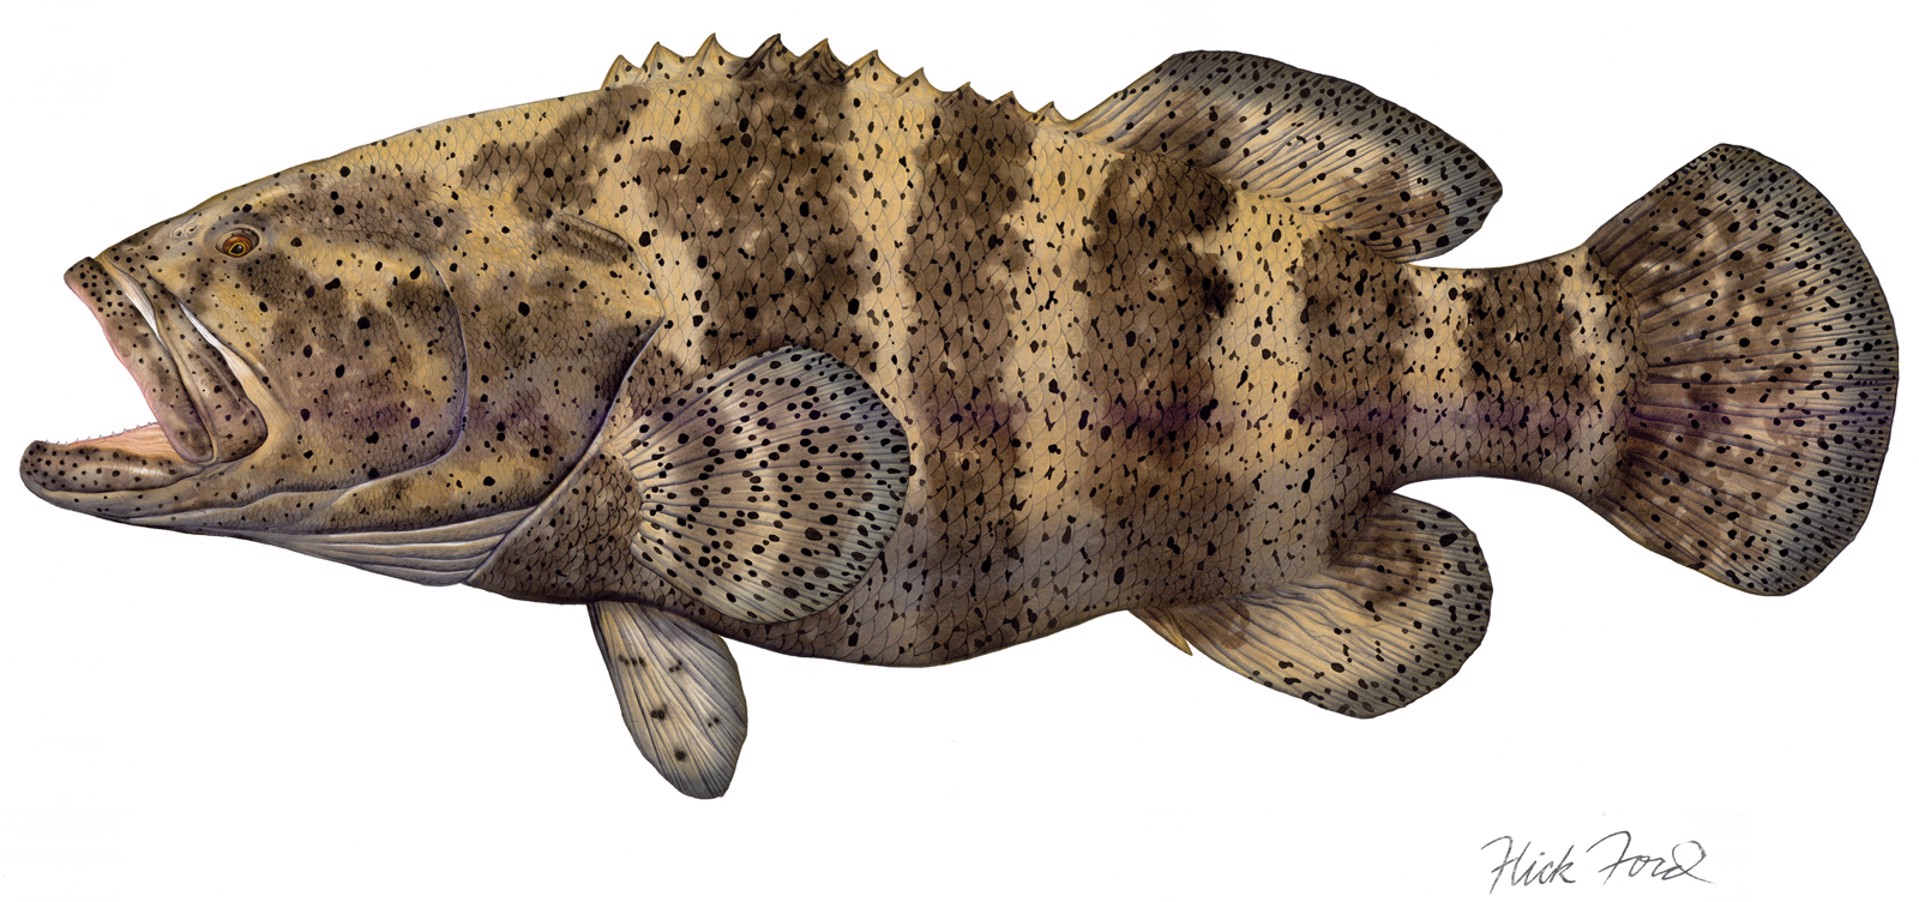 Goliath Grouper by Flick Ford